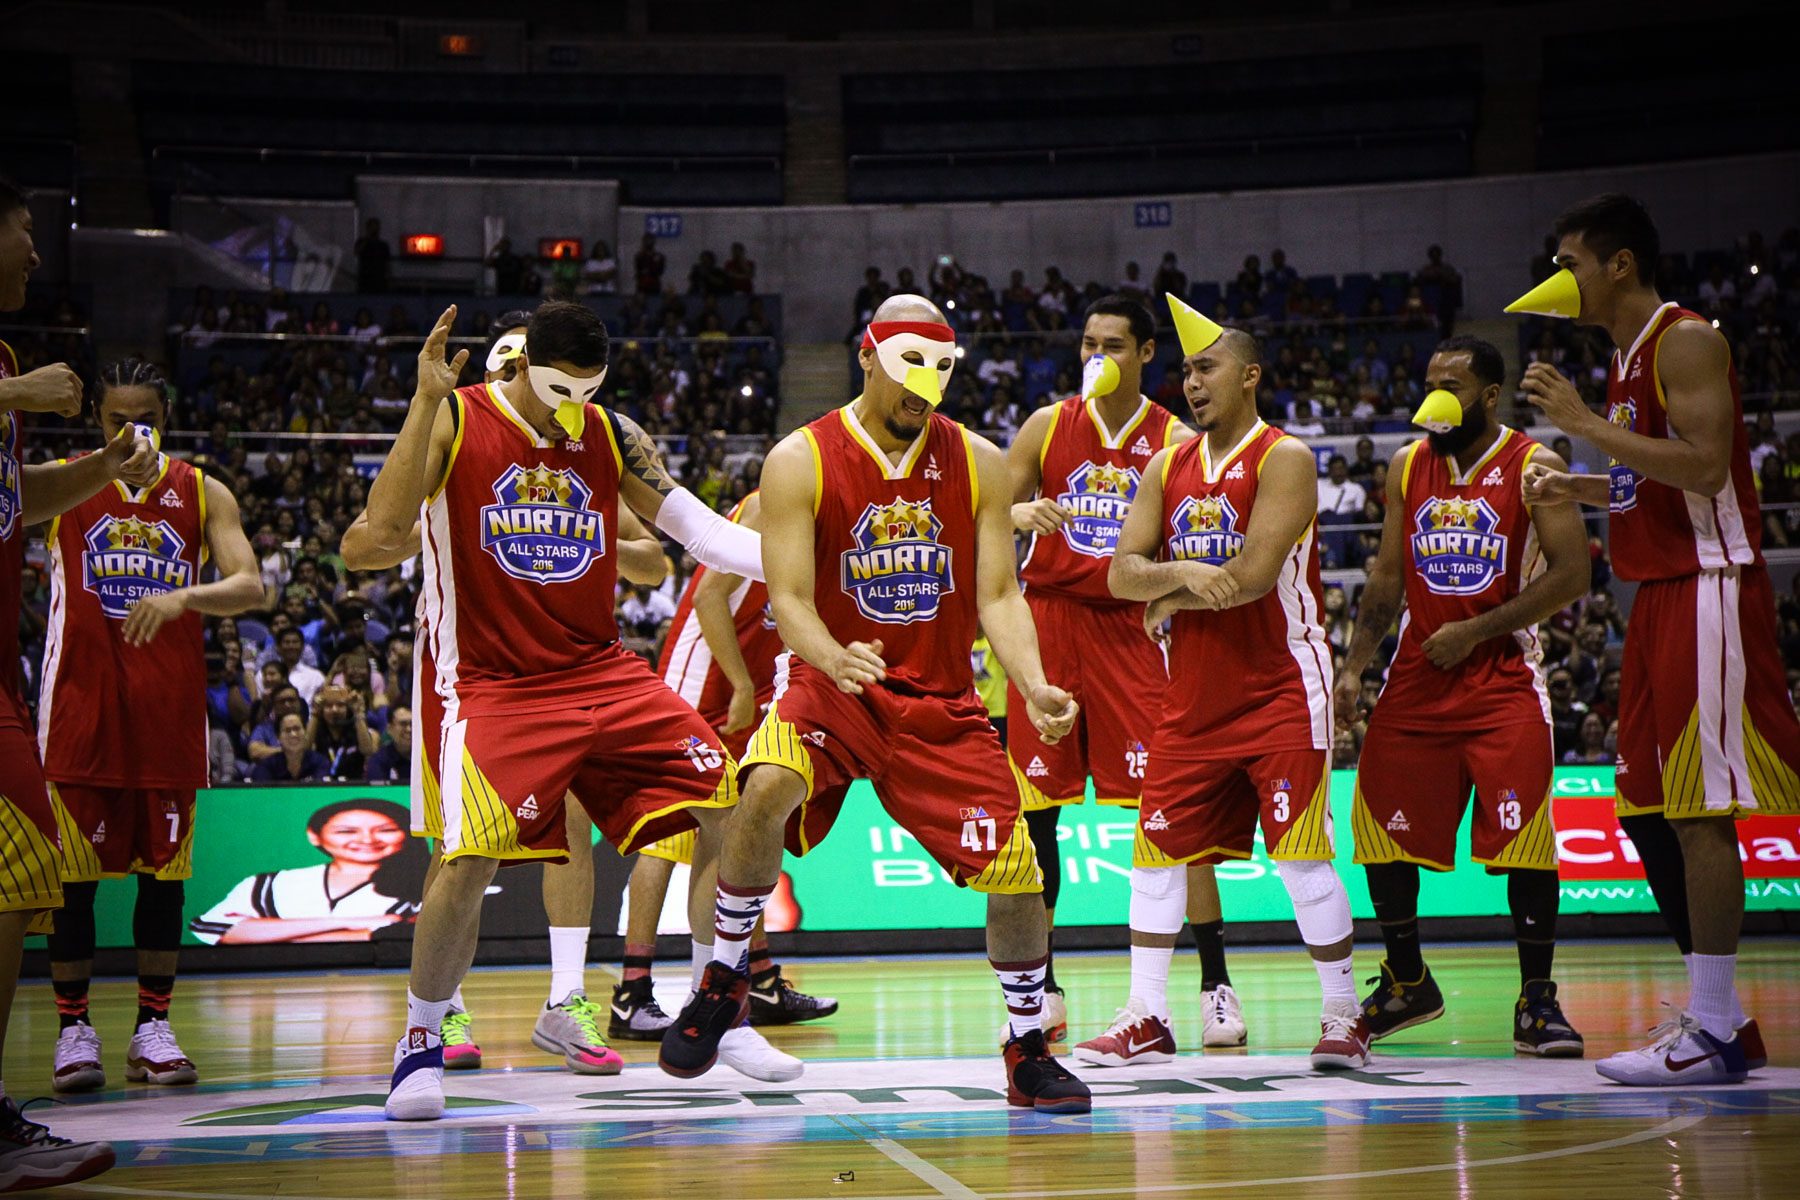 DANCE-OFF. The North Al-Stars show off their moves with props. Photo by Josh Albelda/Rappler 